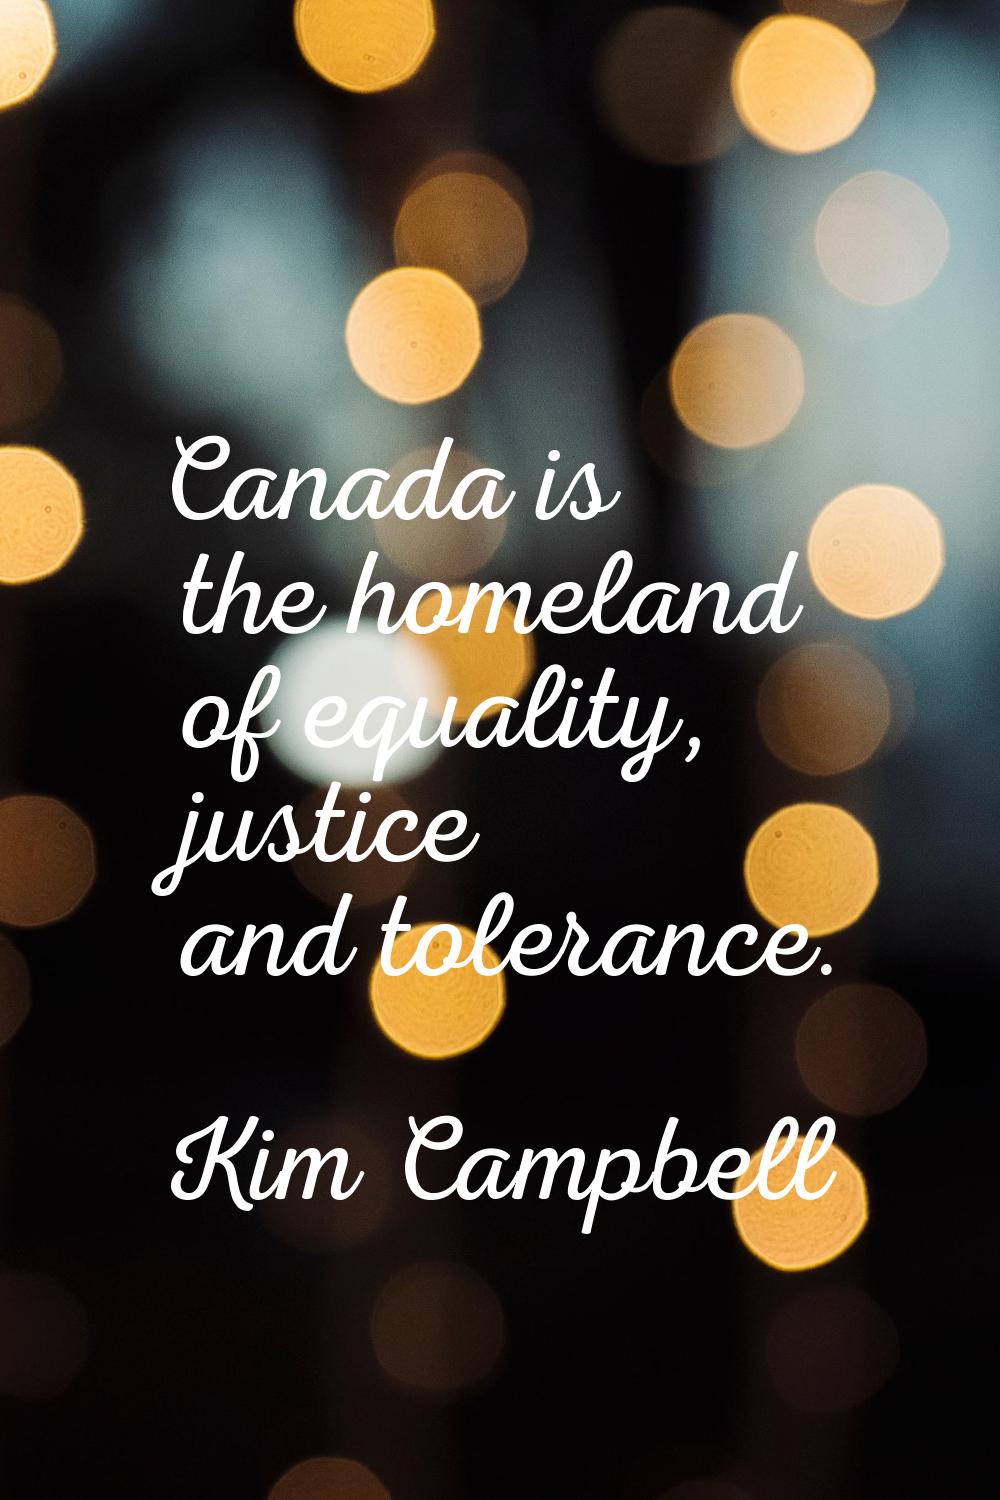 Canada is the homeland of equality, justice and tolerance.